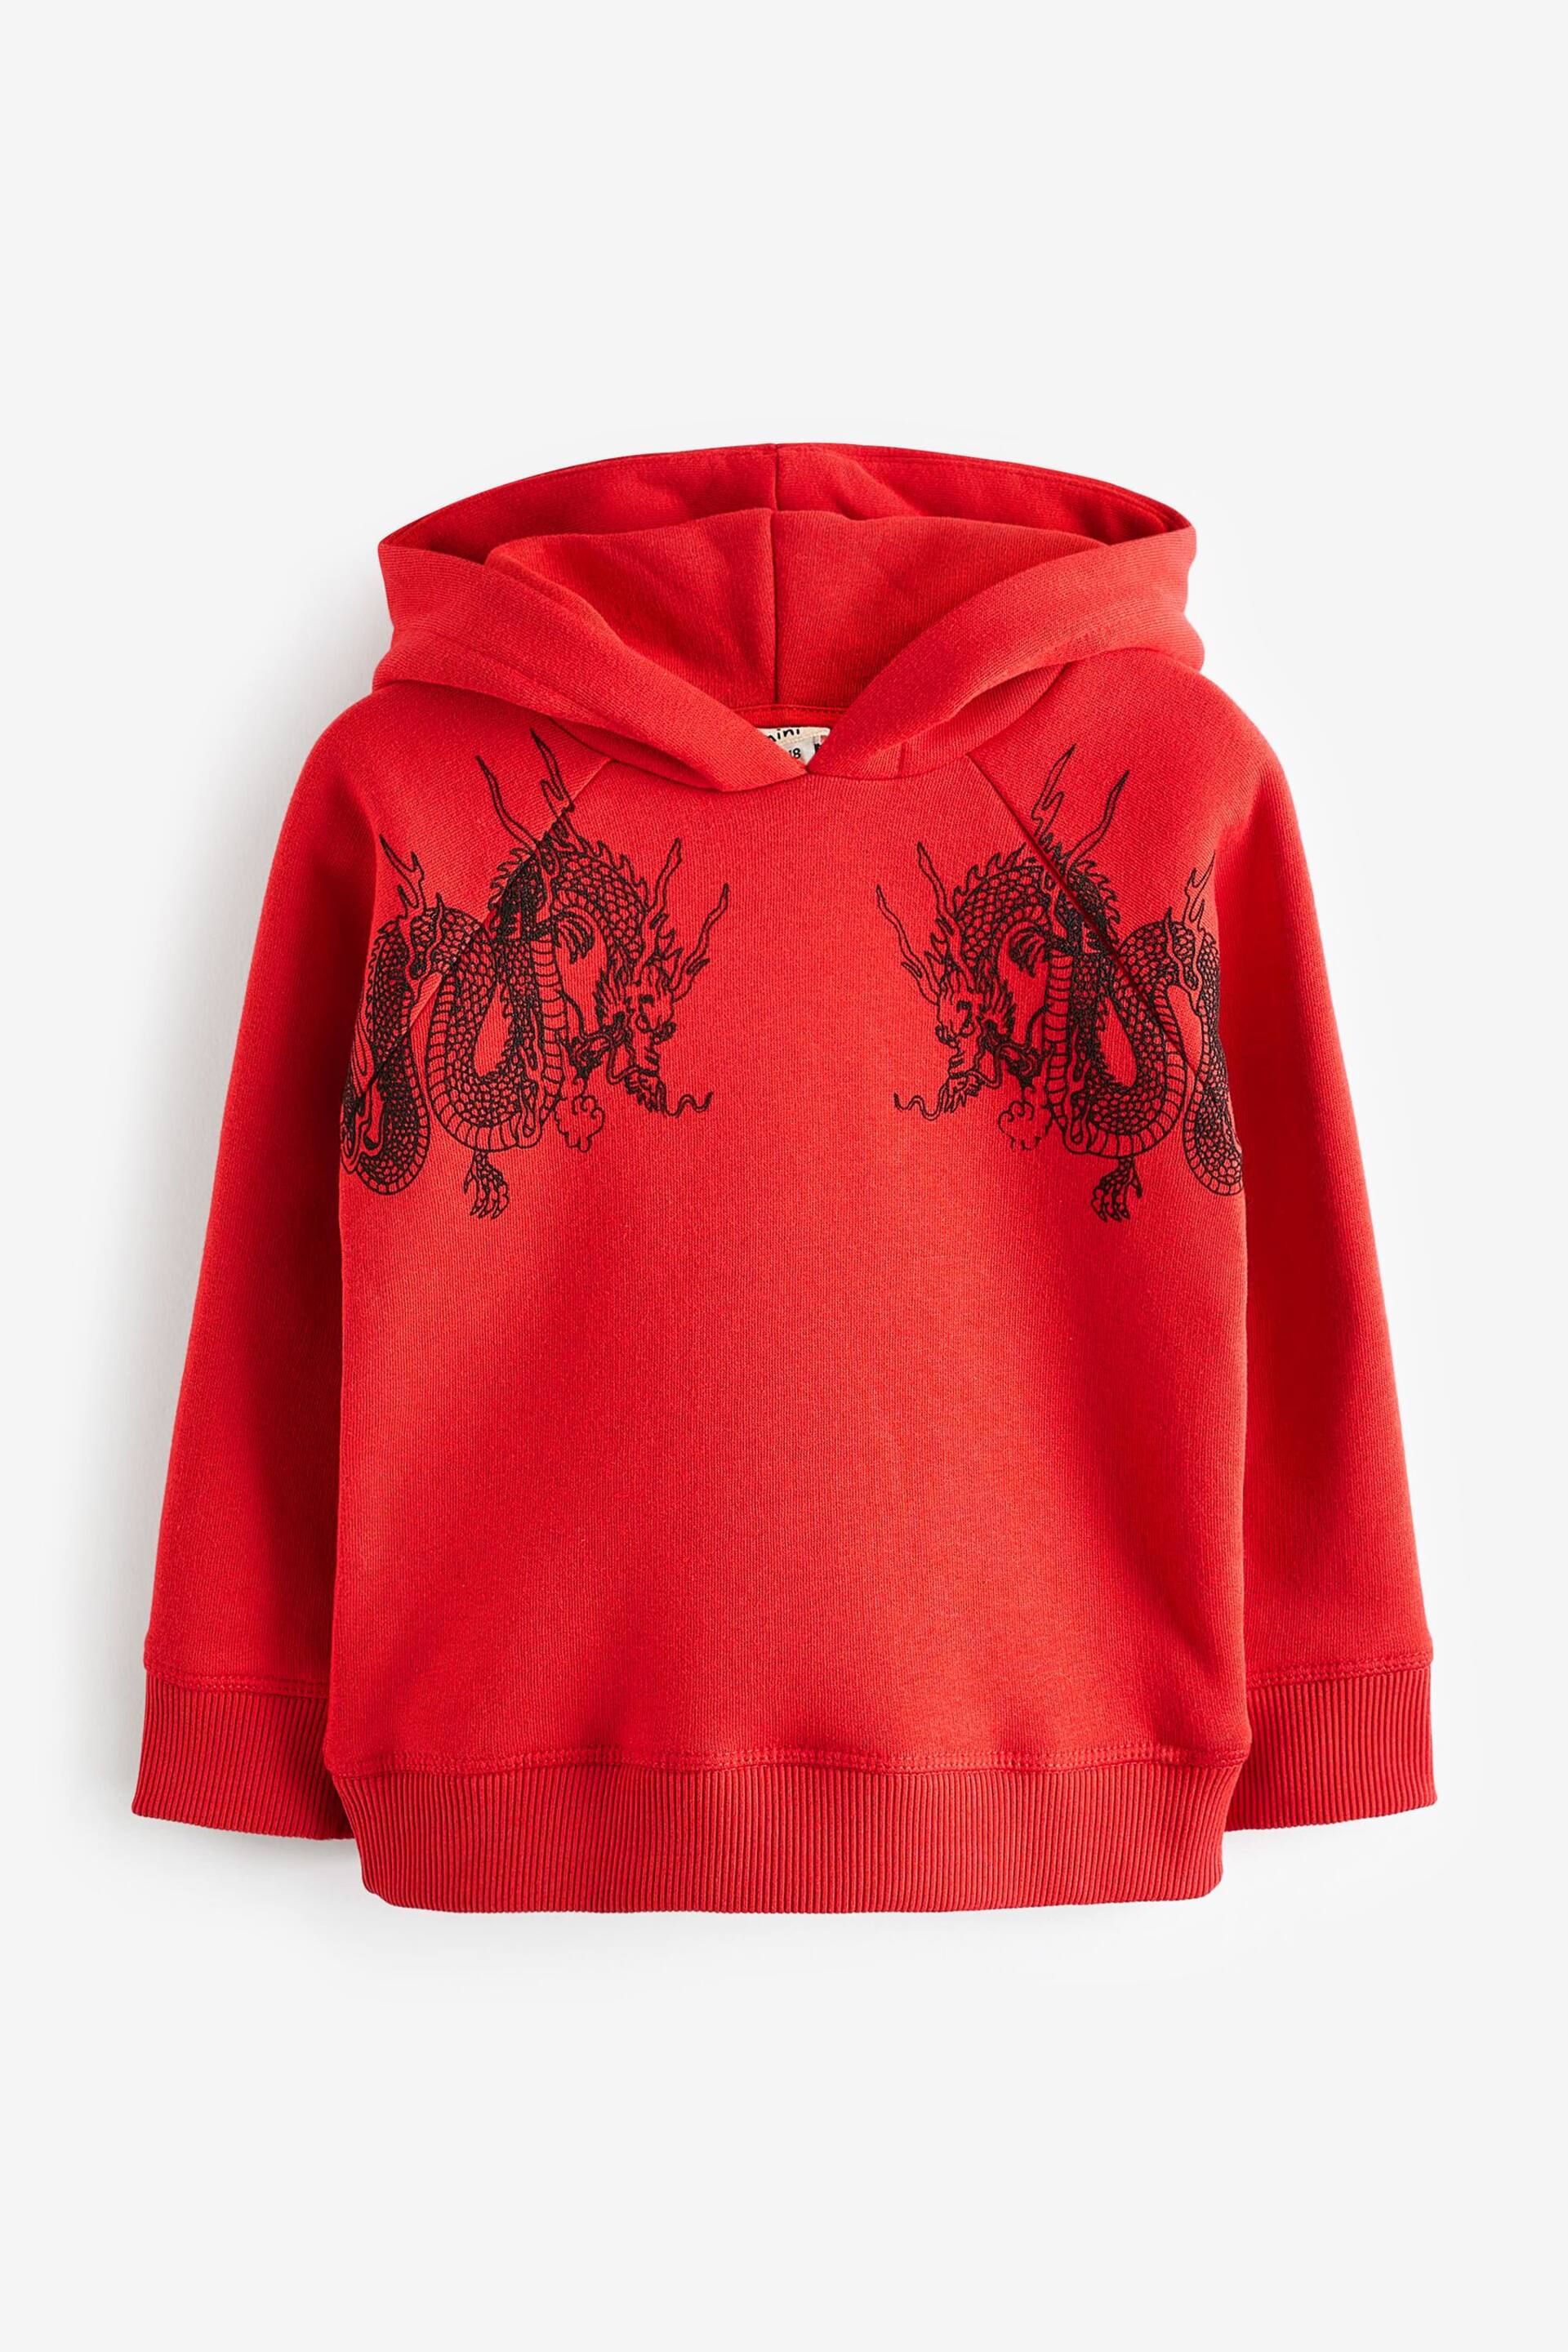 River Island Red Boys Dragon Hoody and Jogger Set - Image 2 of 3